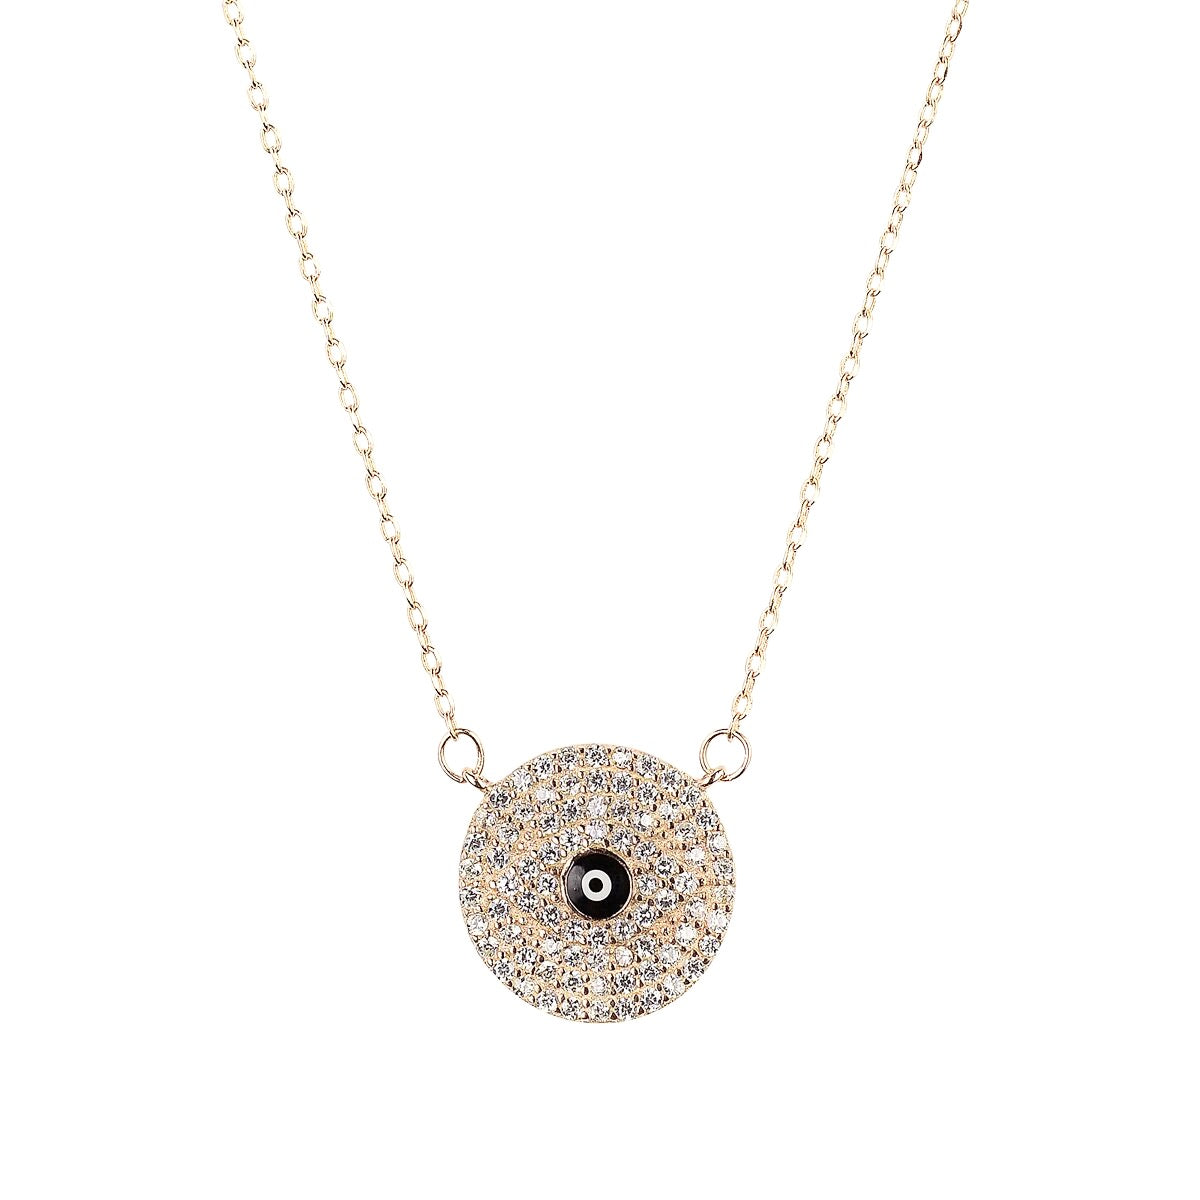 Evil eye surrounded by Swarovski crystals necklace 